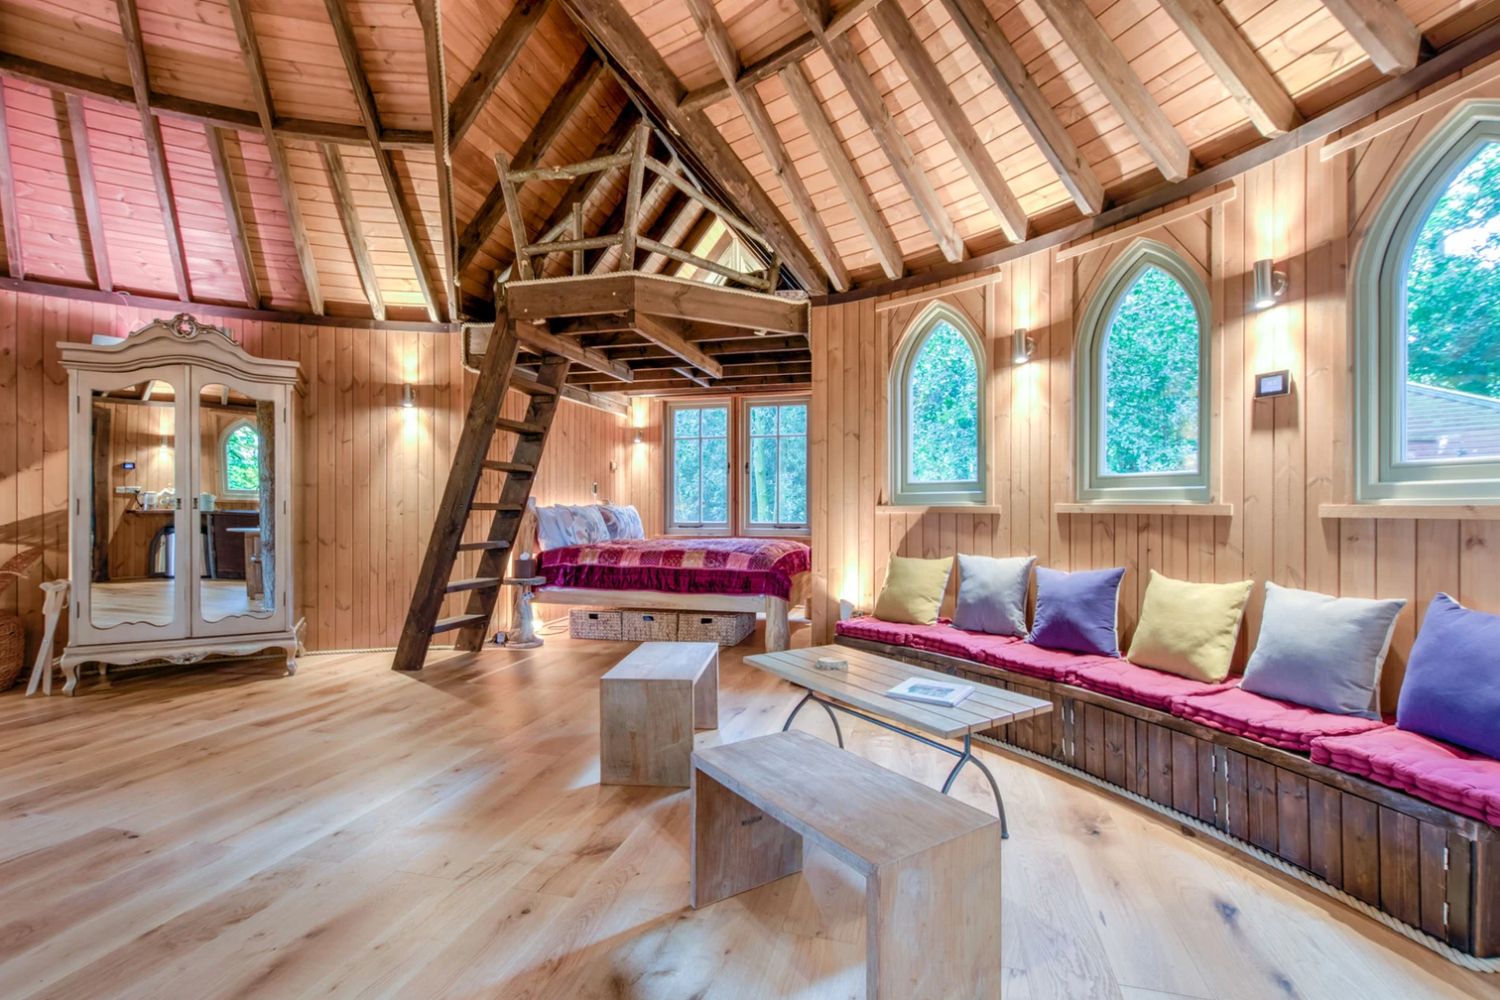 Wooden well-decorated living room in Narnia treehouse - Cedar Hollow Treehouse, Oxford, England